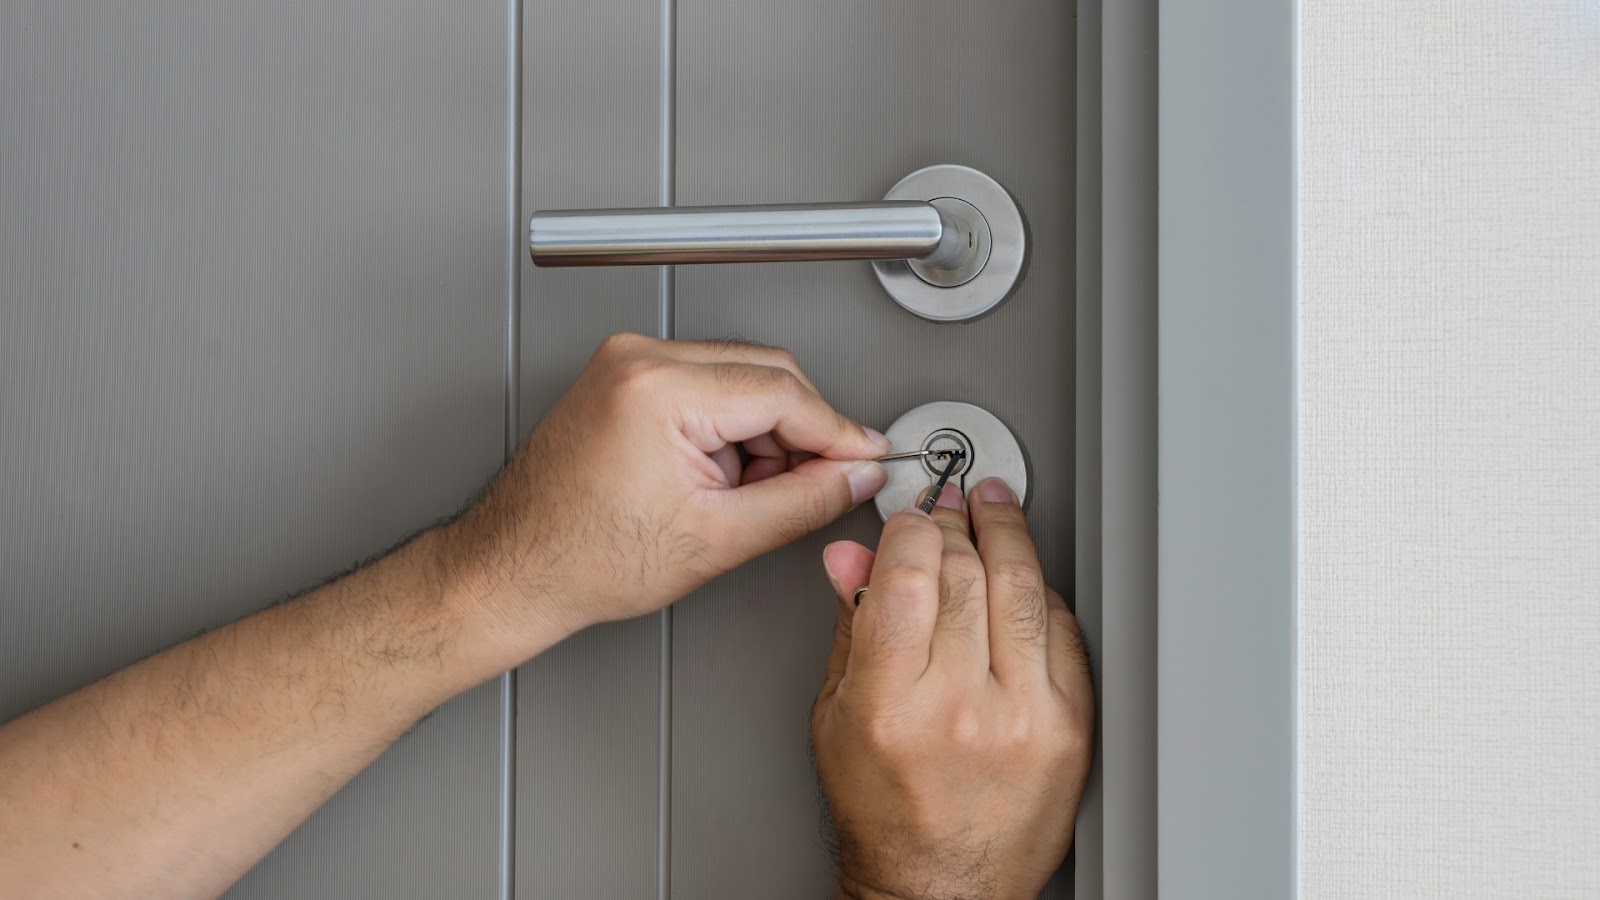 Using tools to perform broken key removal from a residential door lock.